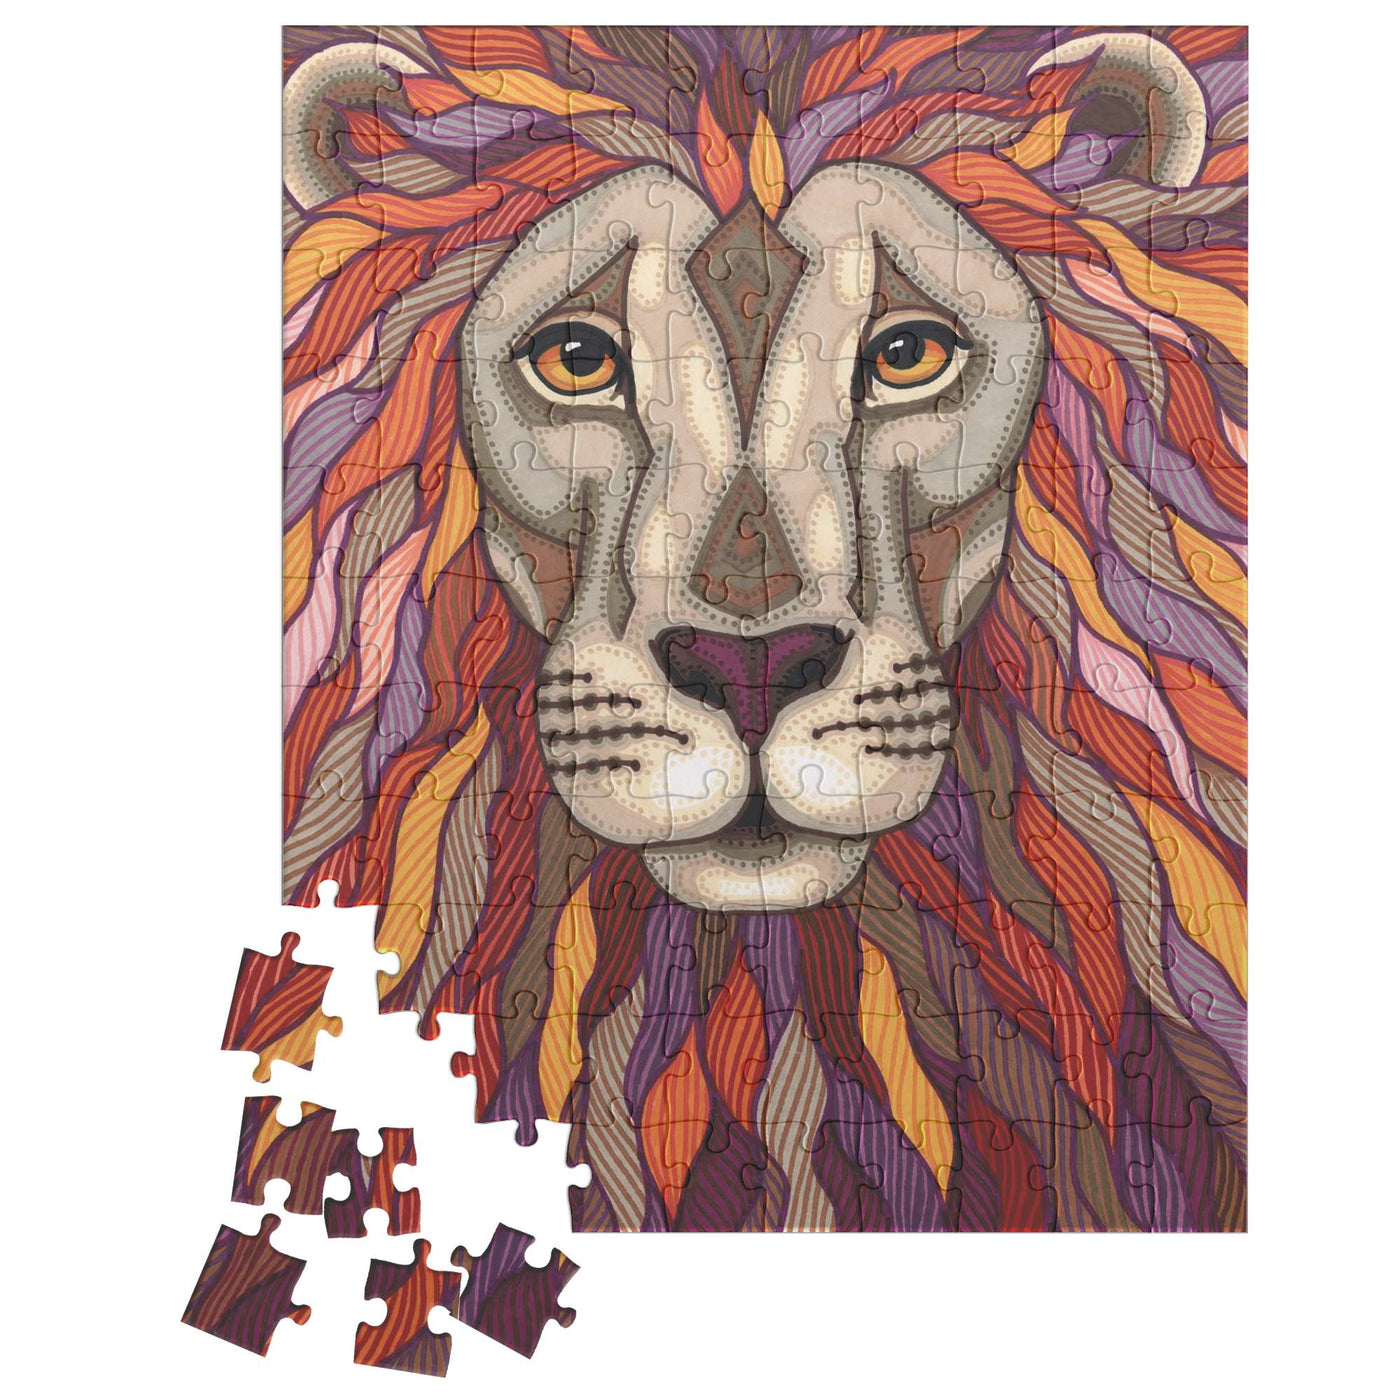 A colorful Lion Pride Puzzle partially completed with loose pieces in the bottom left corner.